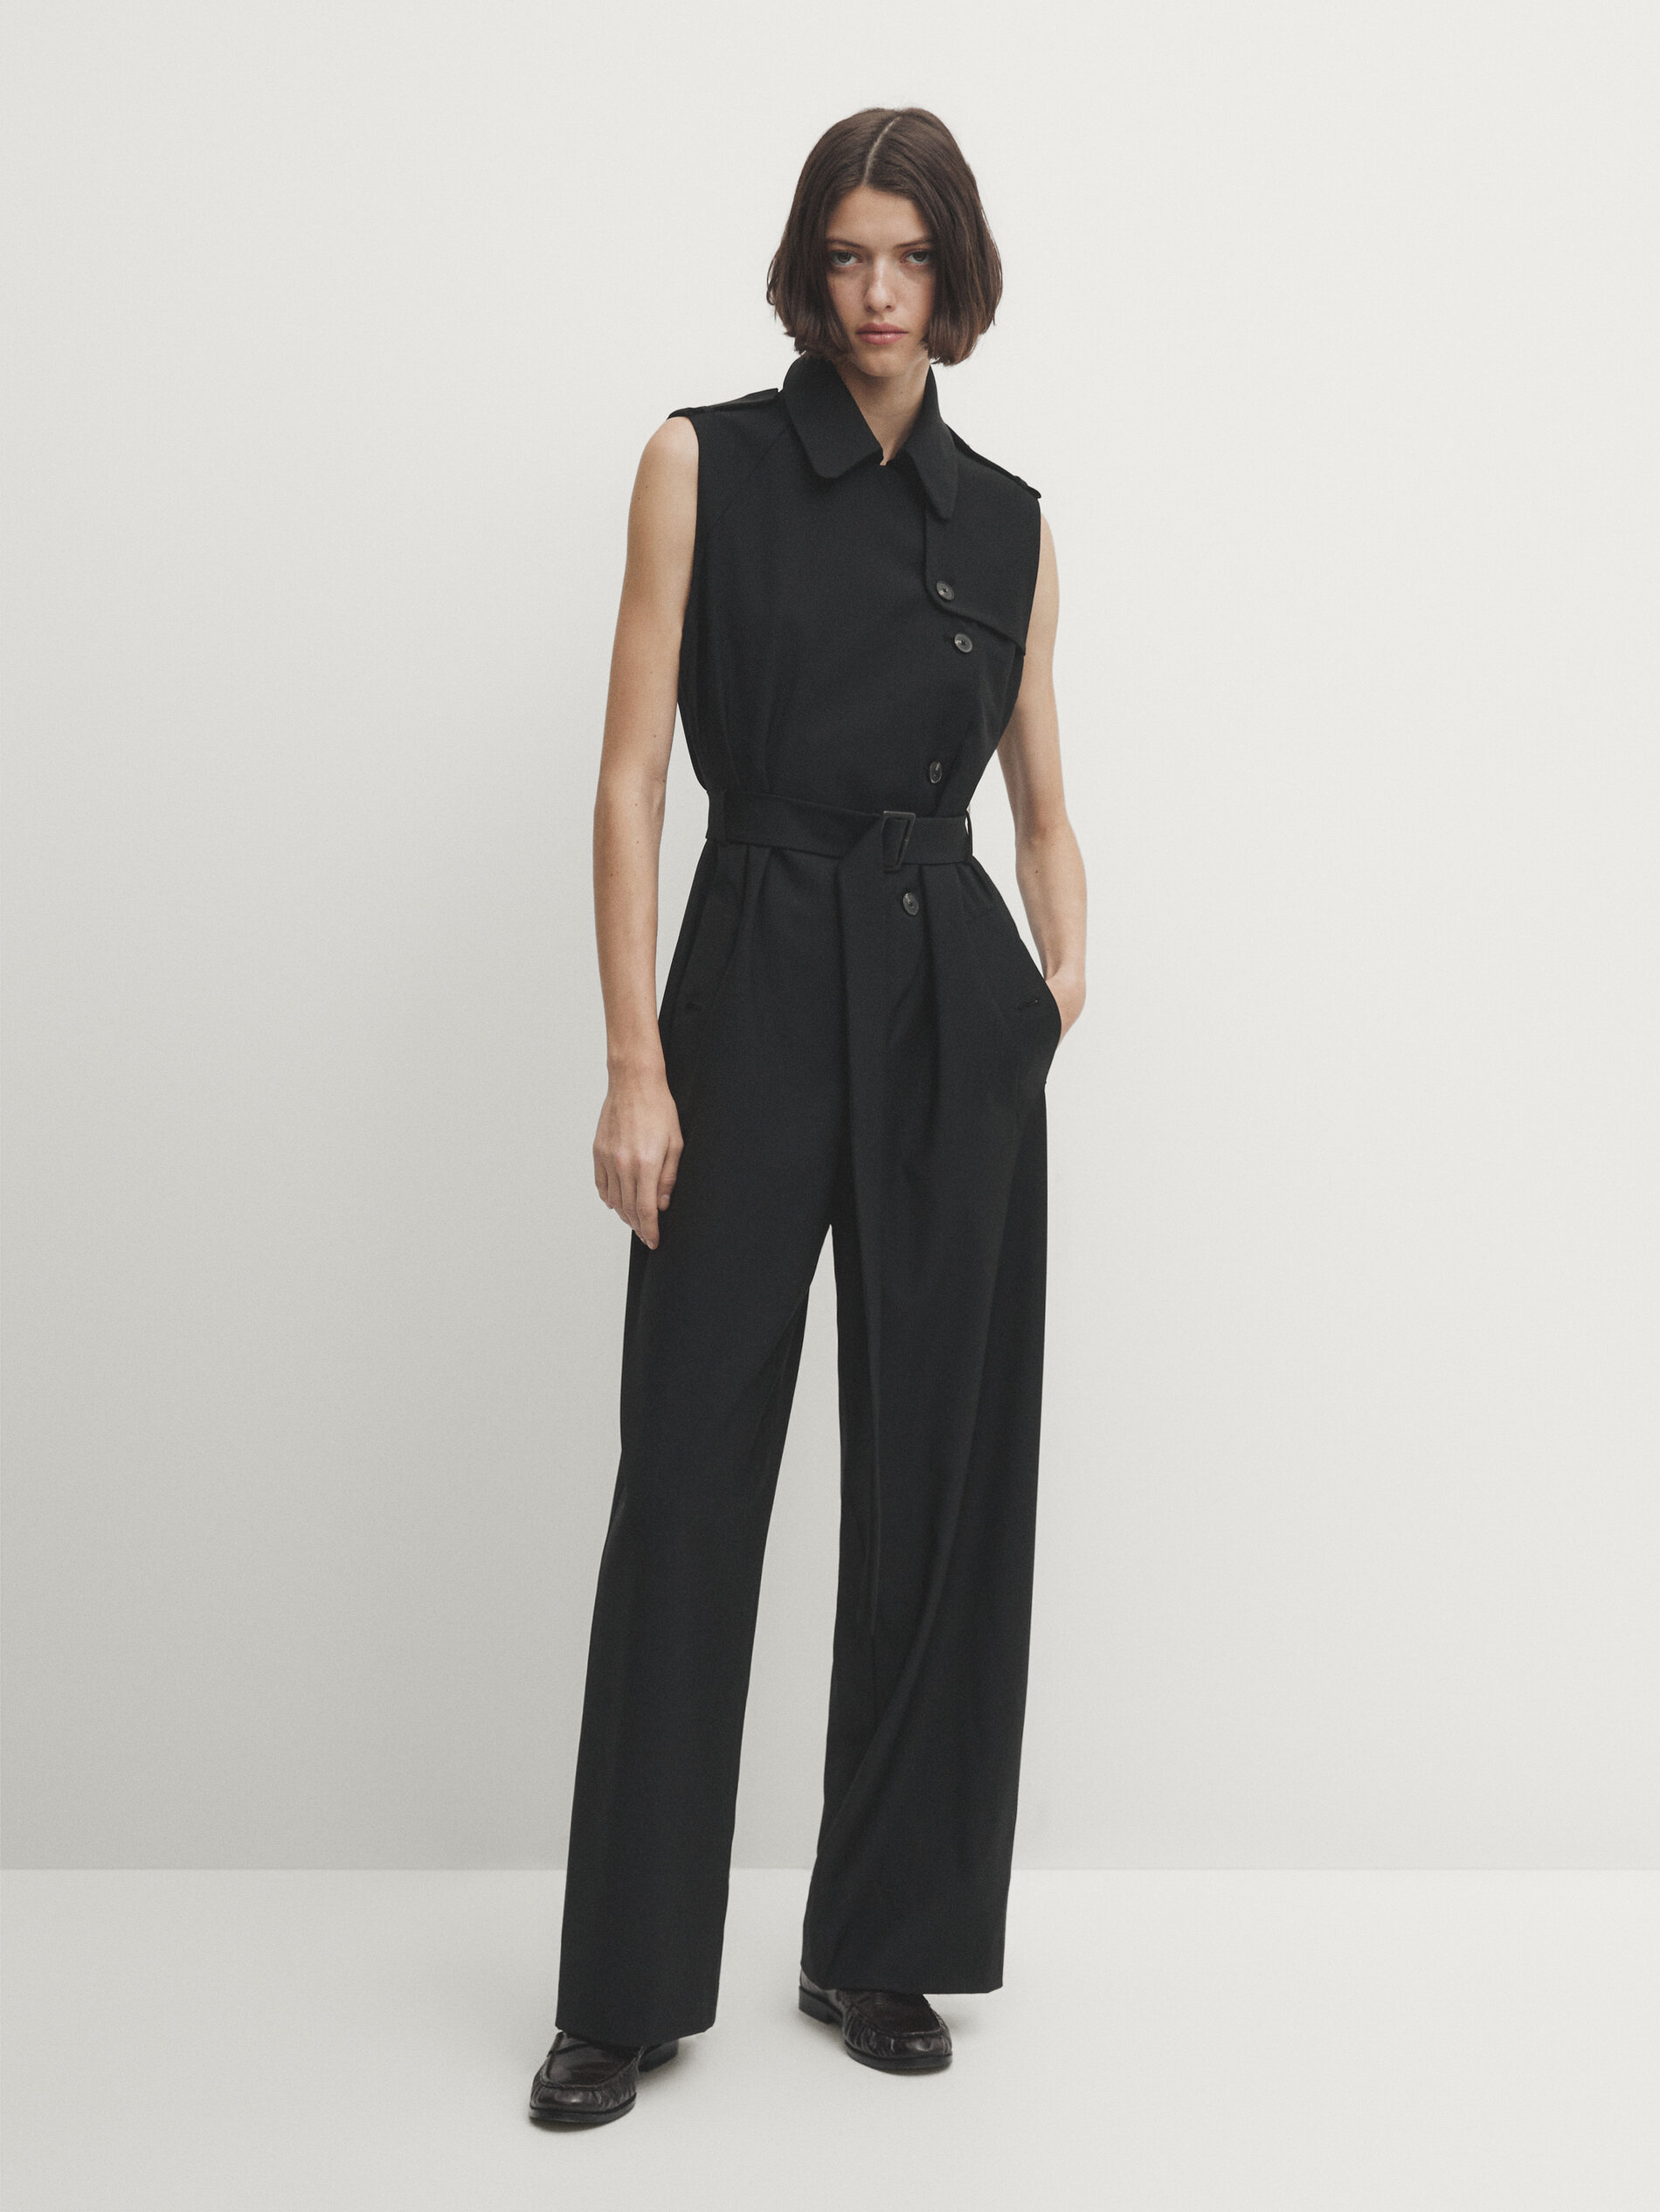 23 Wedding Guest Jumpsuits for Any Dress Code